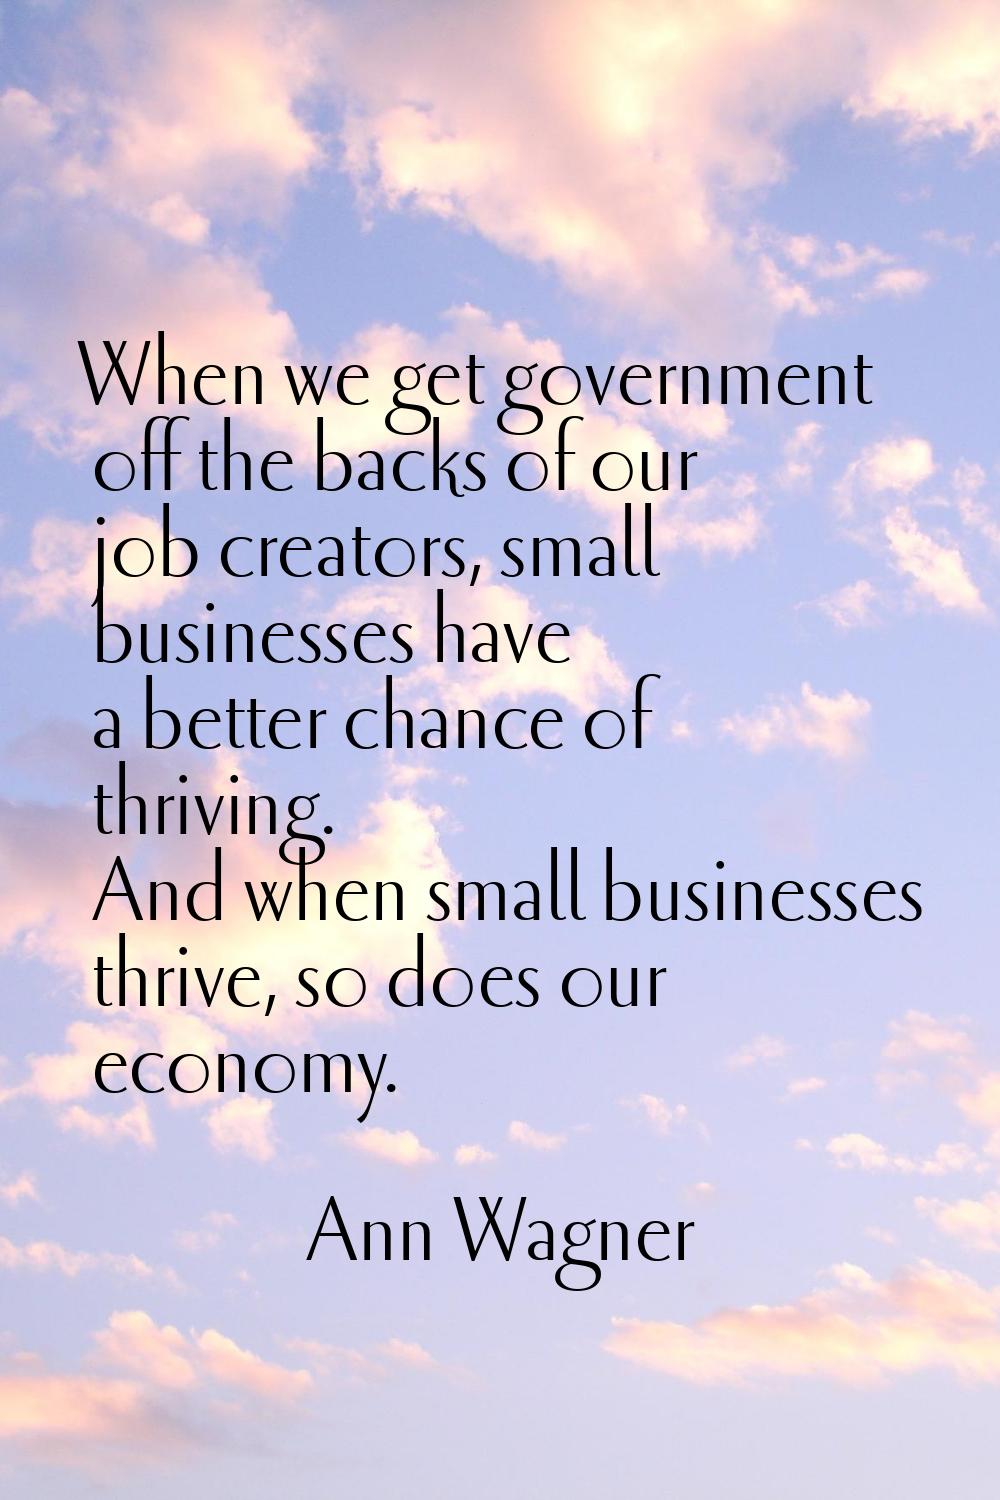 When we get government off the backs of our job creators, small businesses have a better chance of 